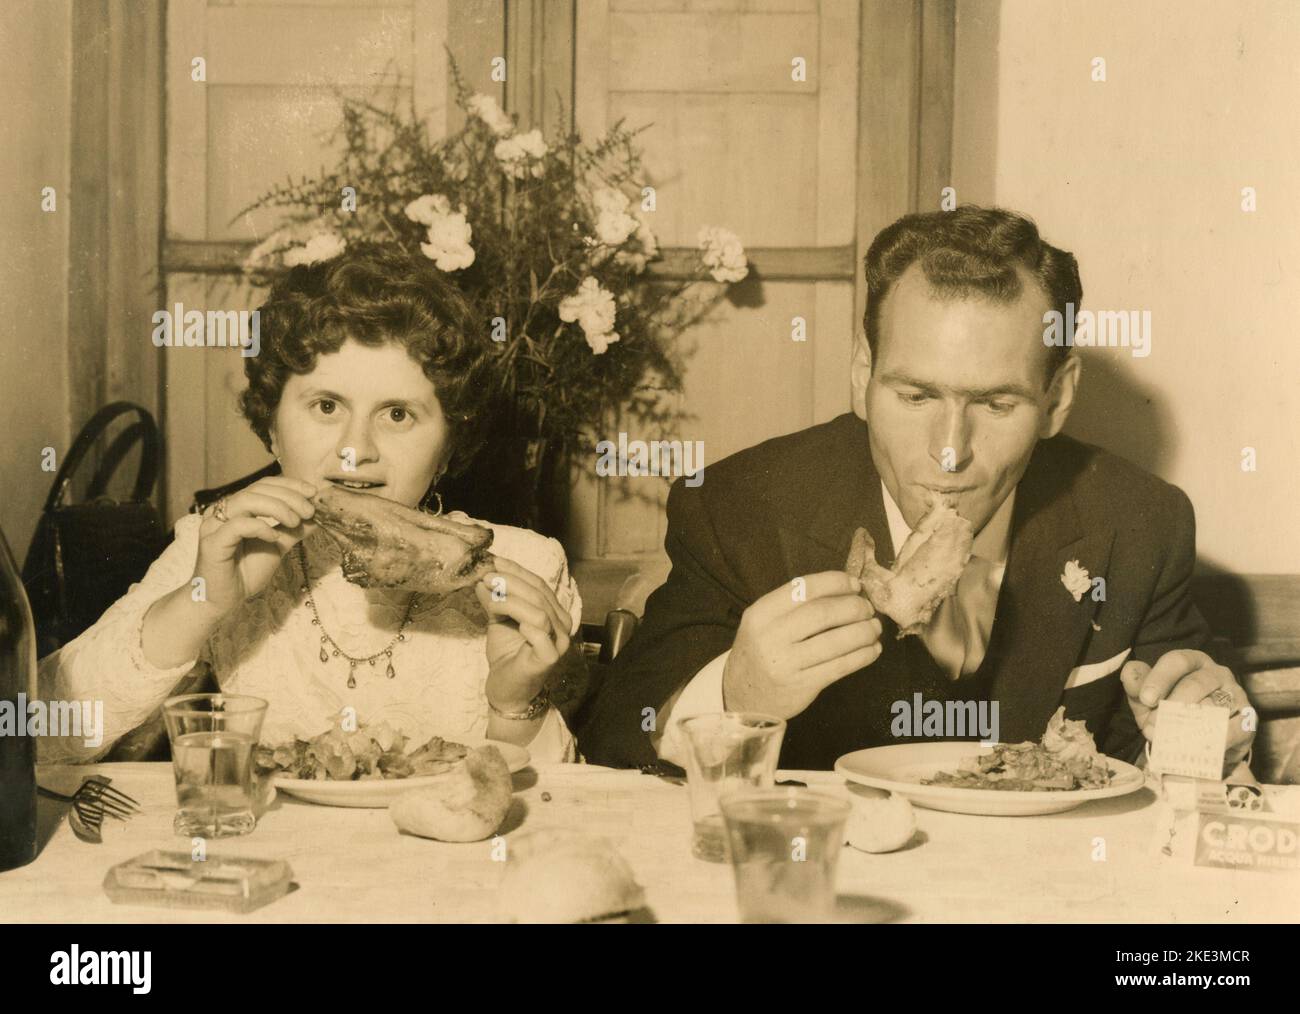 Wedding in a village in central Italy: The Bride and the Groom eating at the restaurant, 1950s Stock Photo